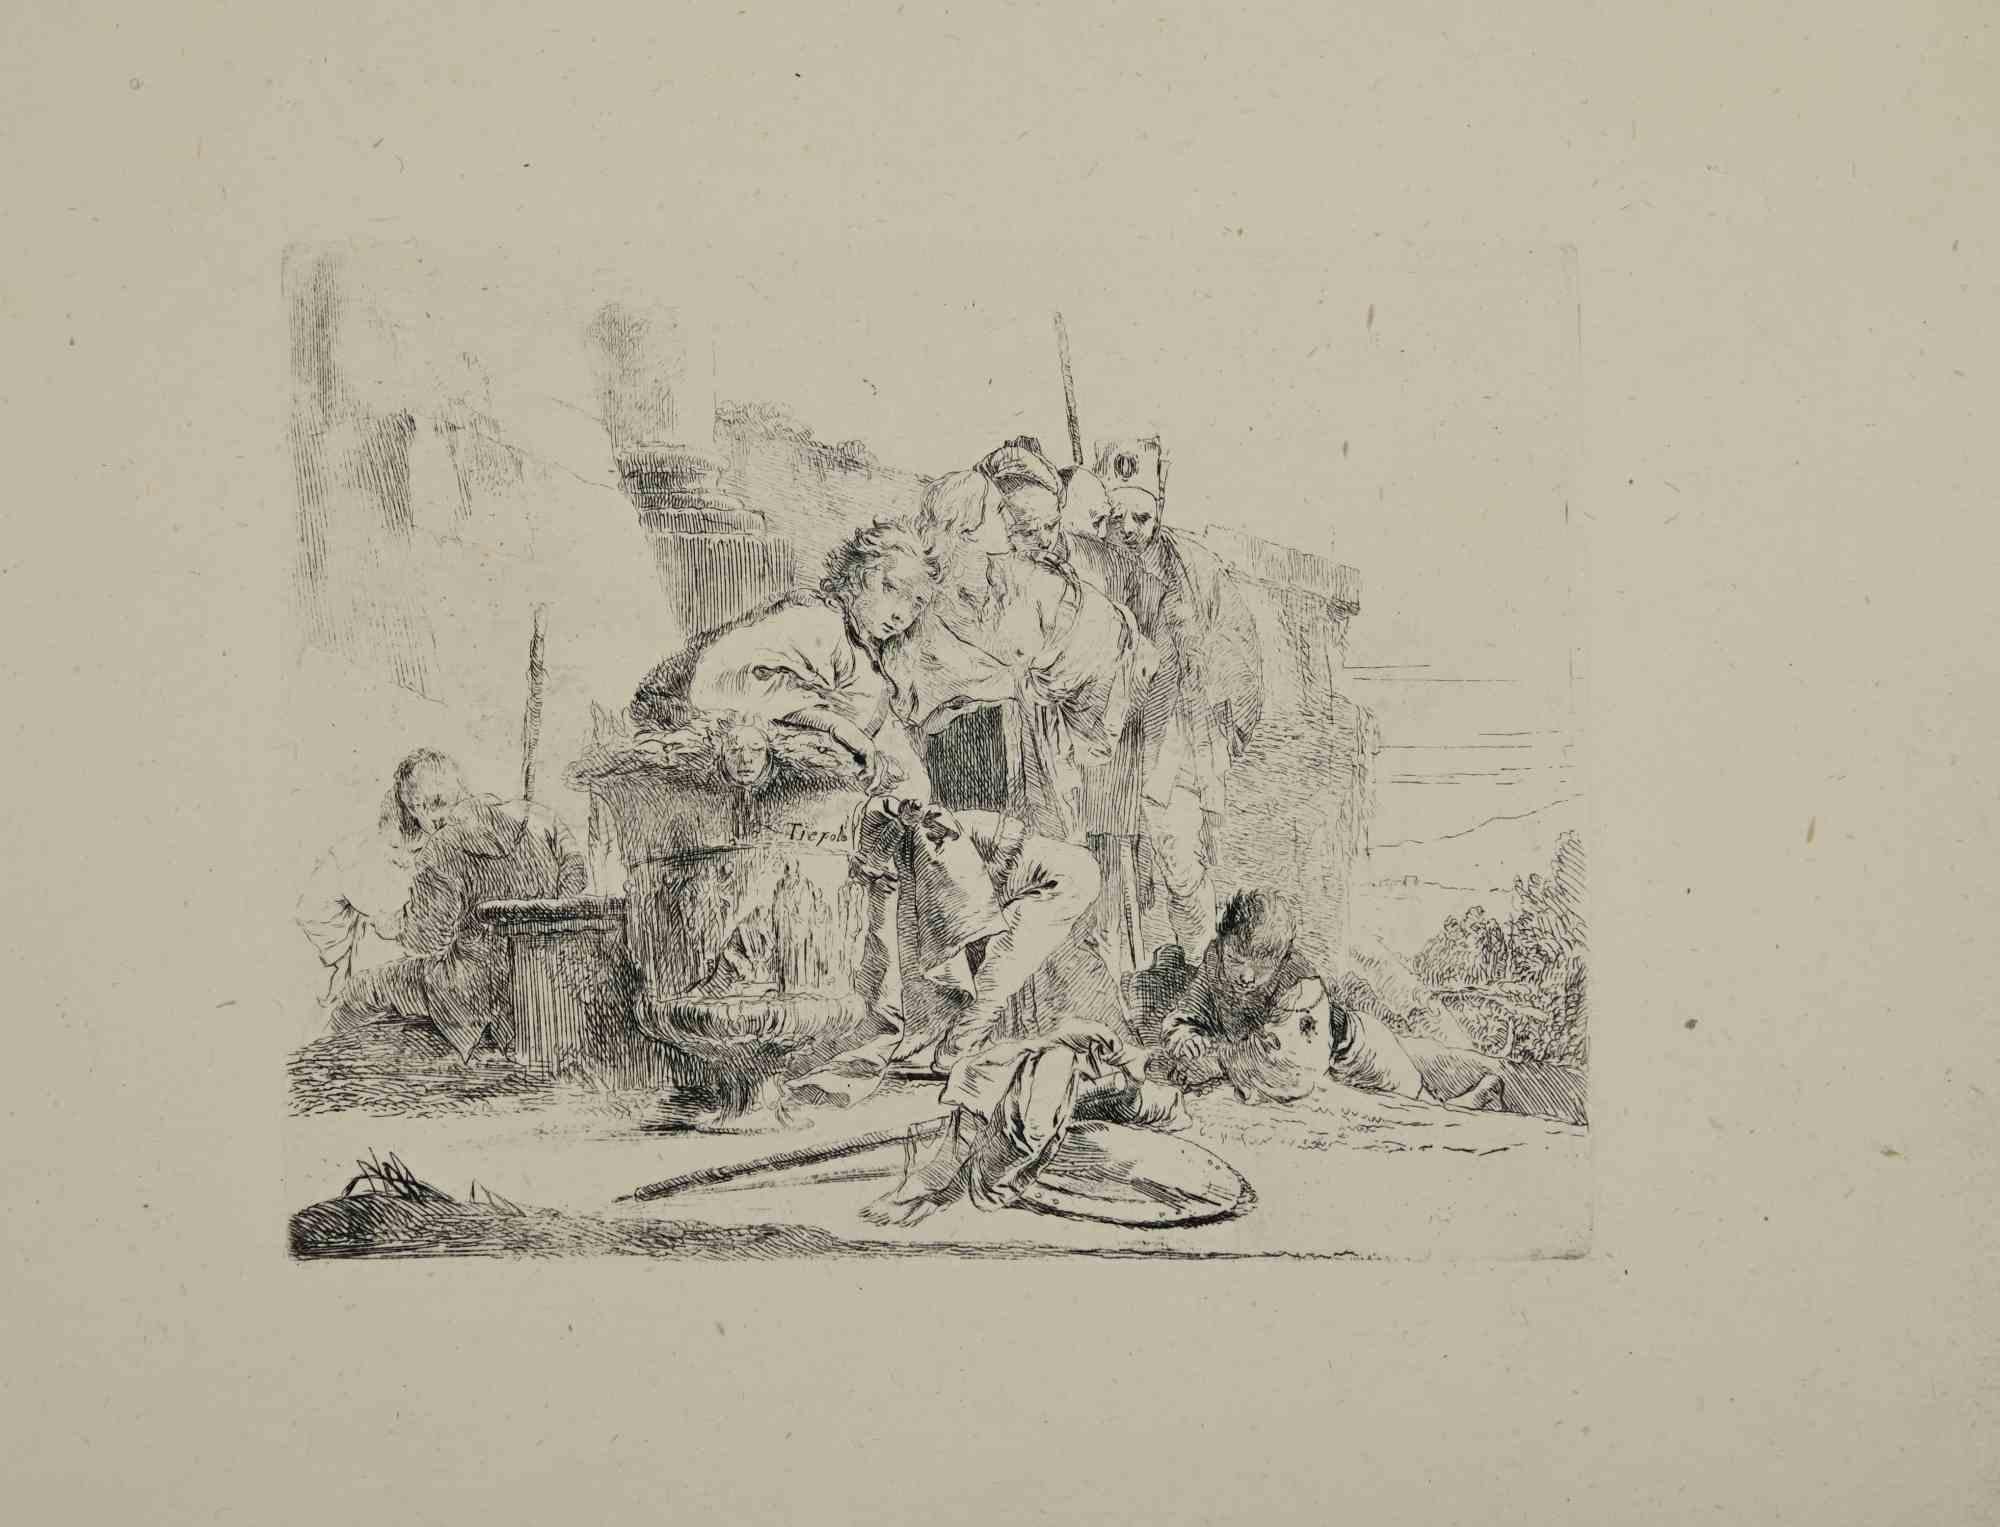 Giovanni Battista Tiepolo Figurative Print - The Young Man Sitting - Etching by G.B. Tiepolo - 1785